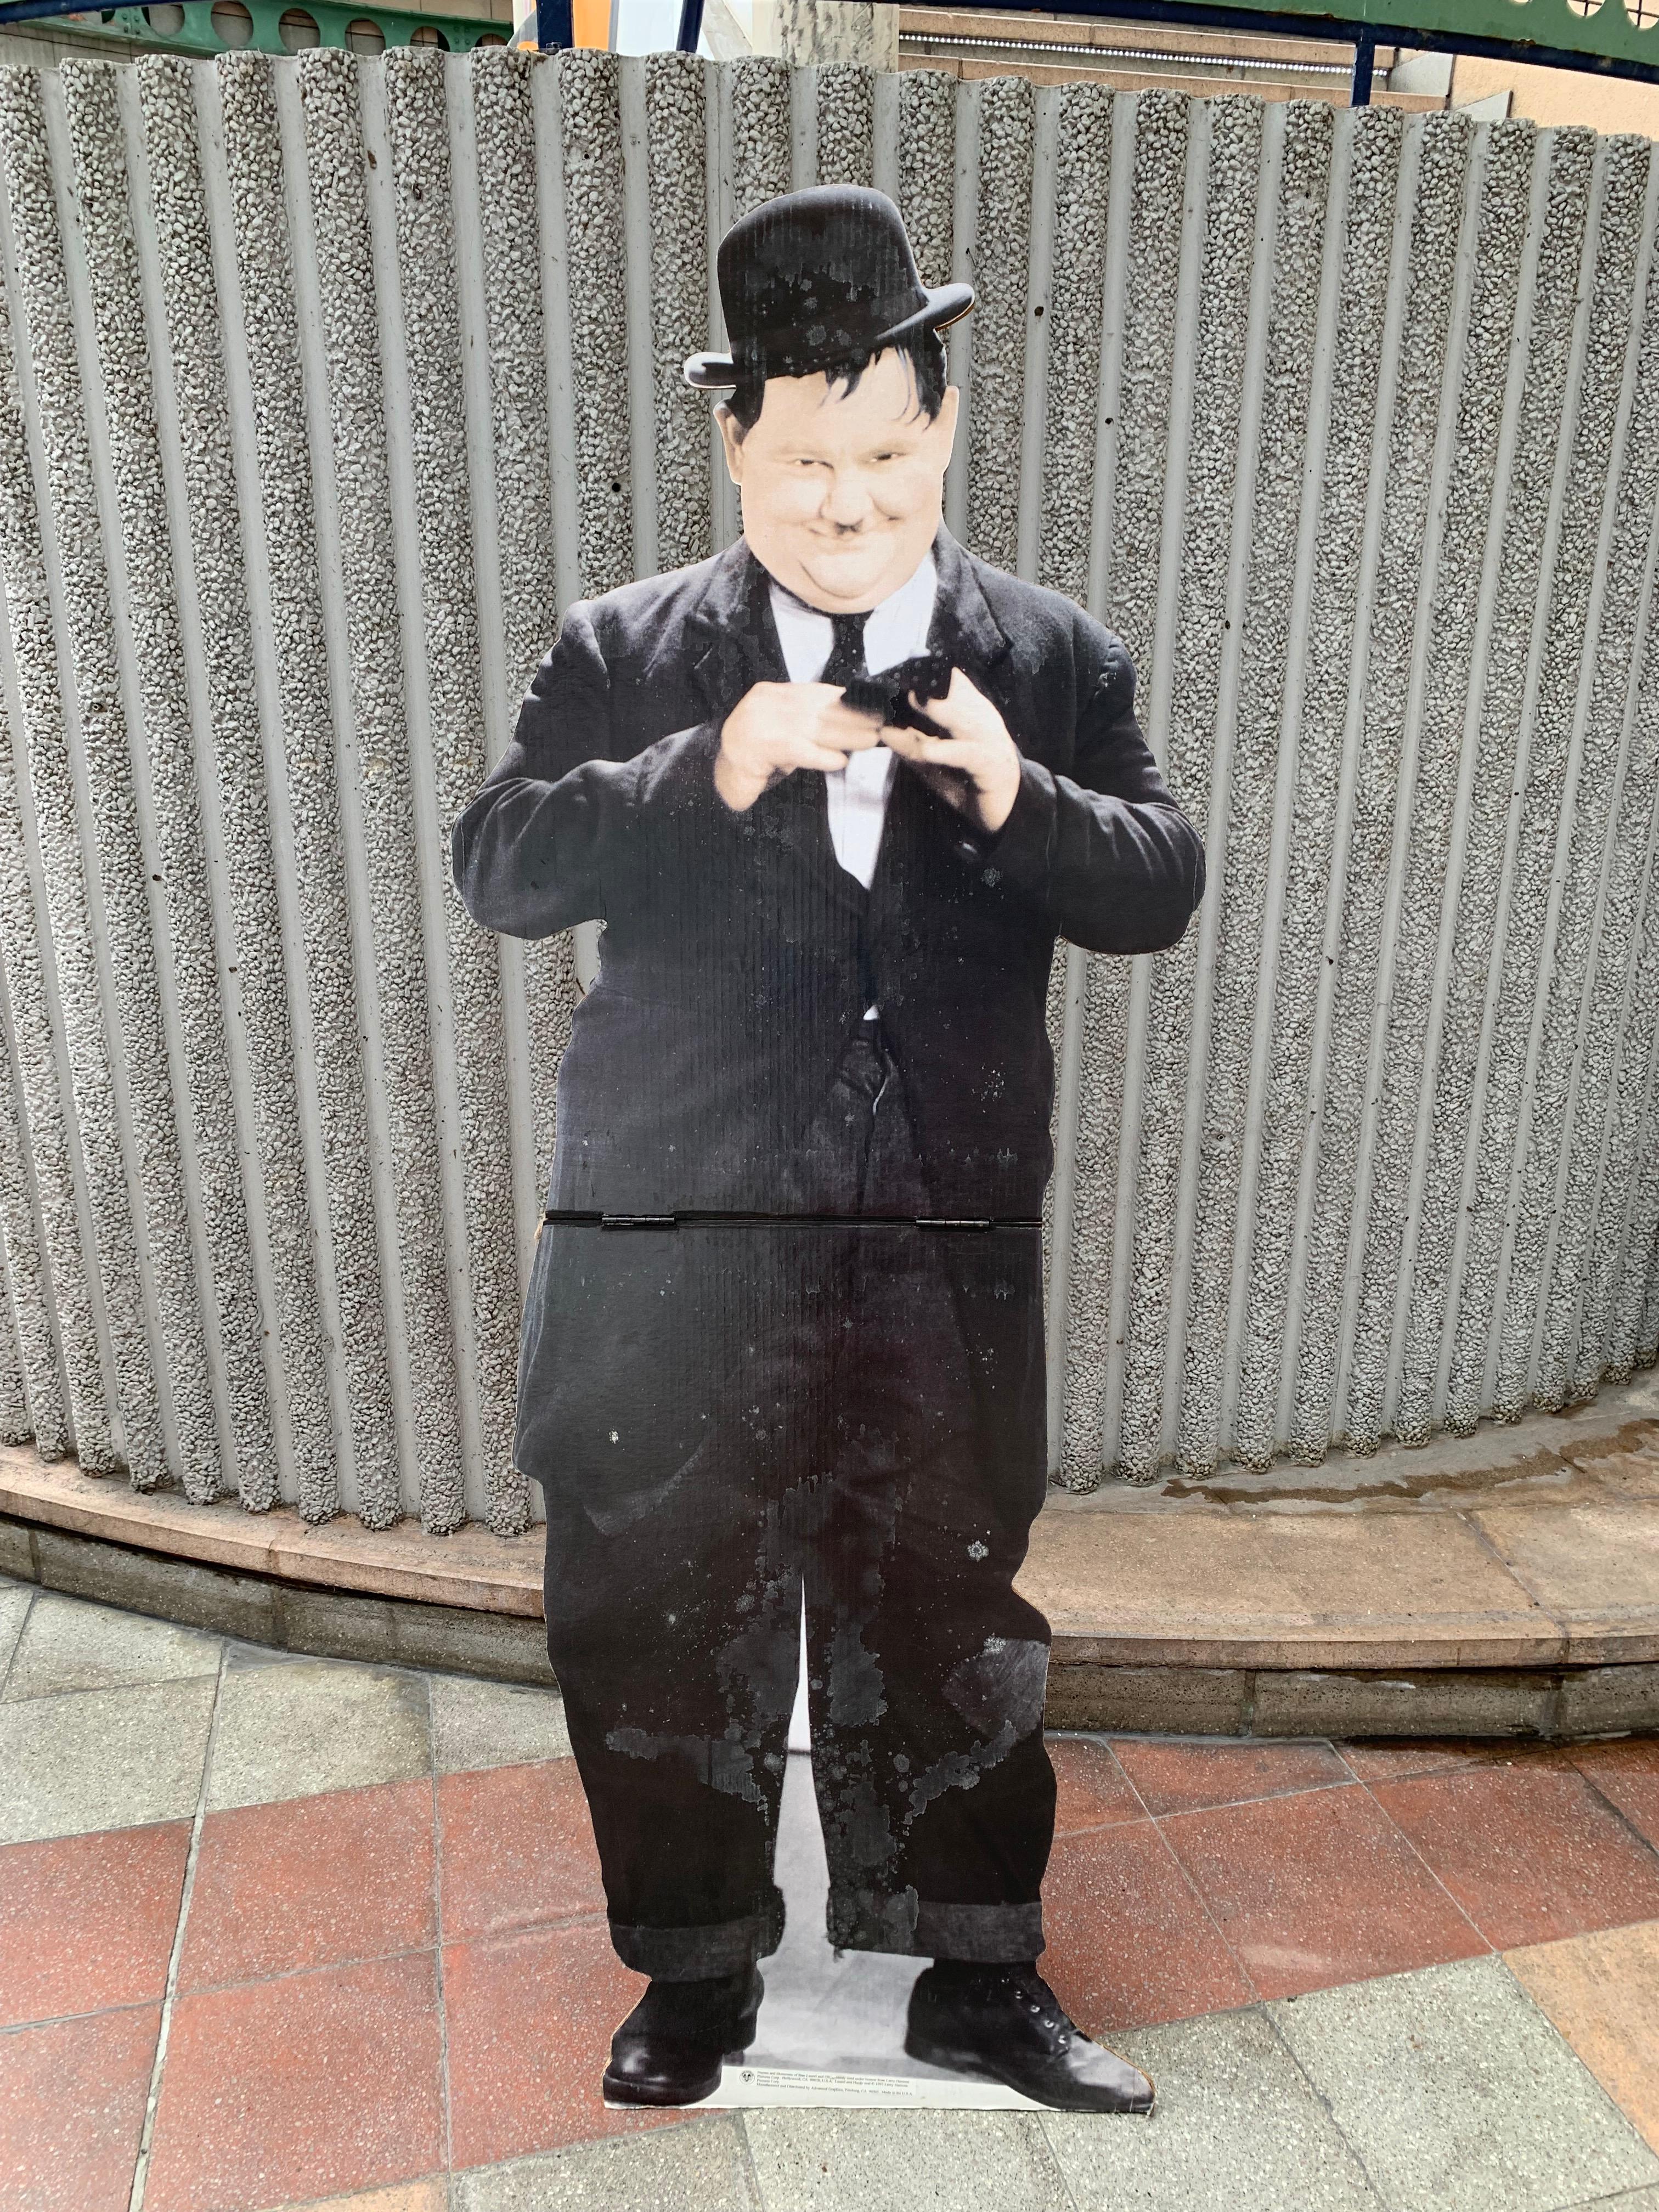 laurel and hardy costumes